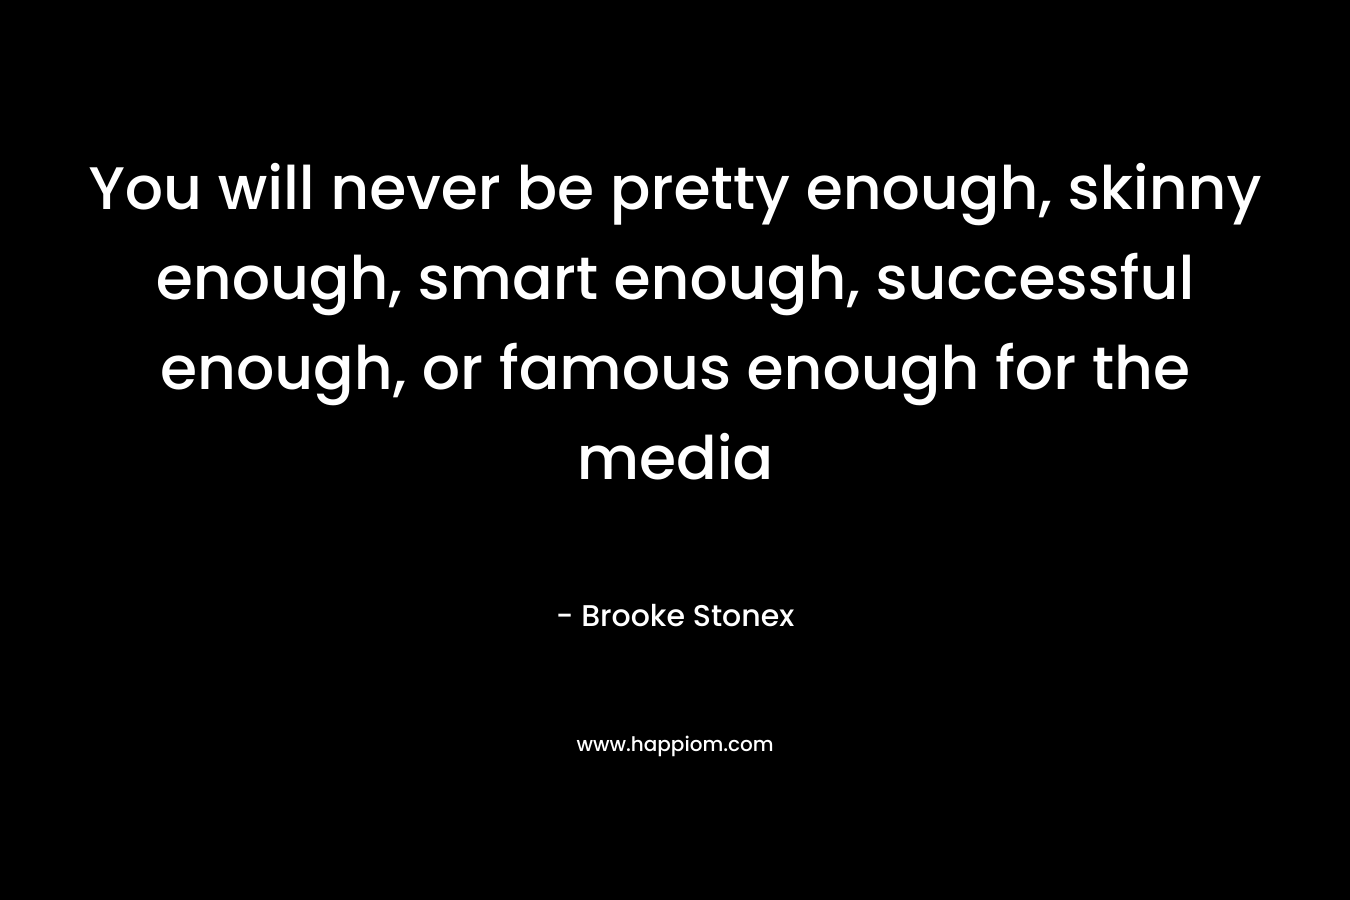 You will never be pretty enough, skinny enough, smart enough, successful enough, or famous enough for the media – Brooke Stonex